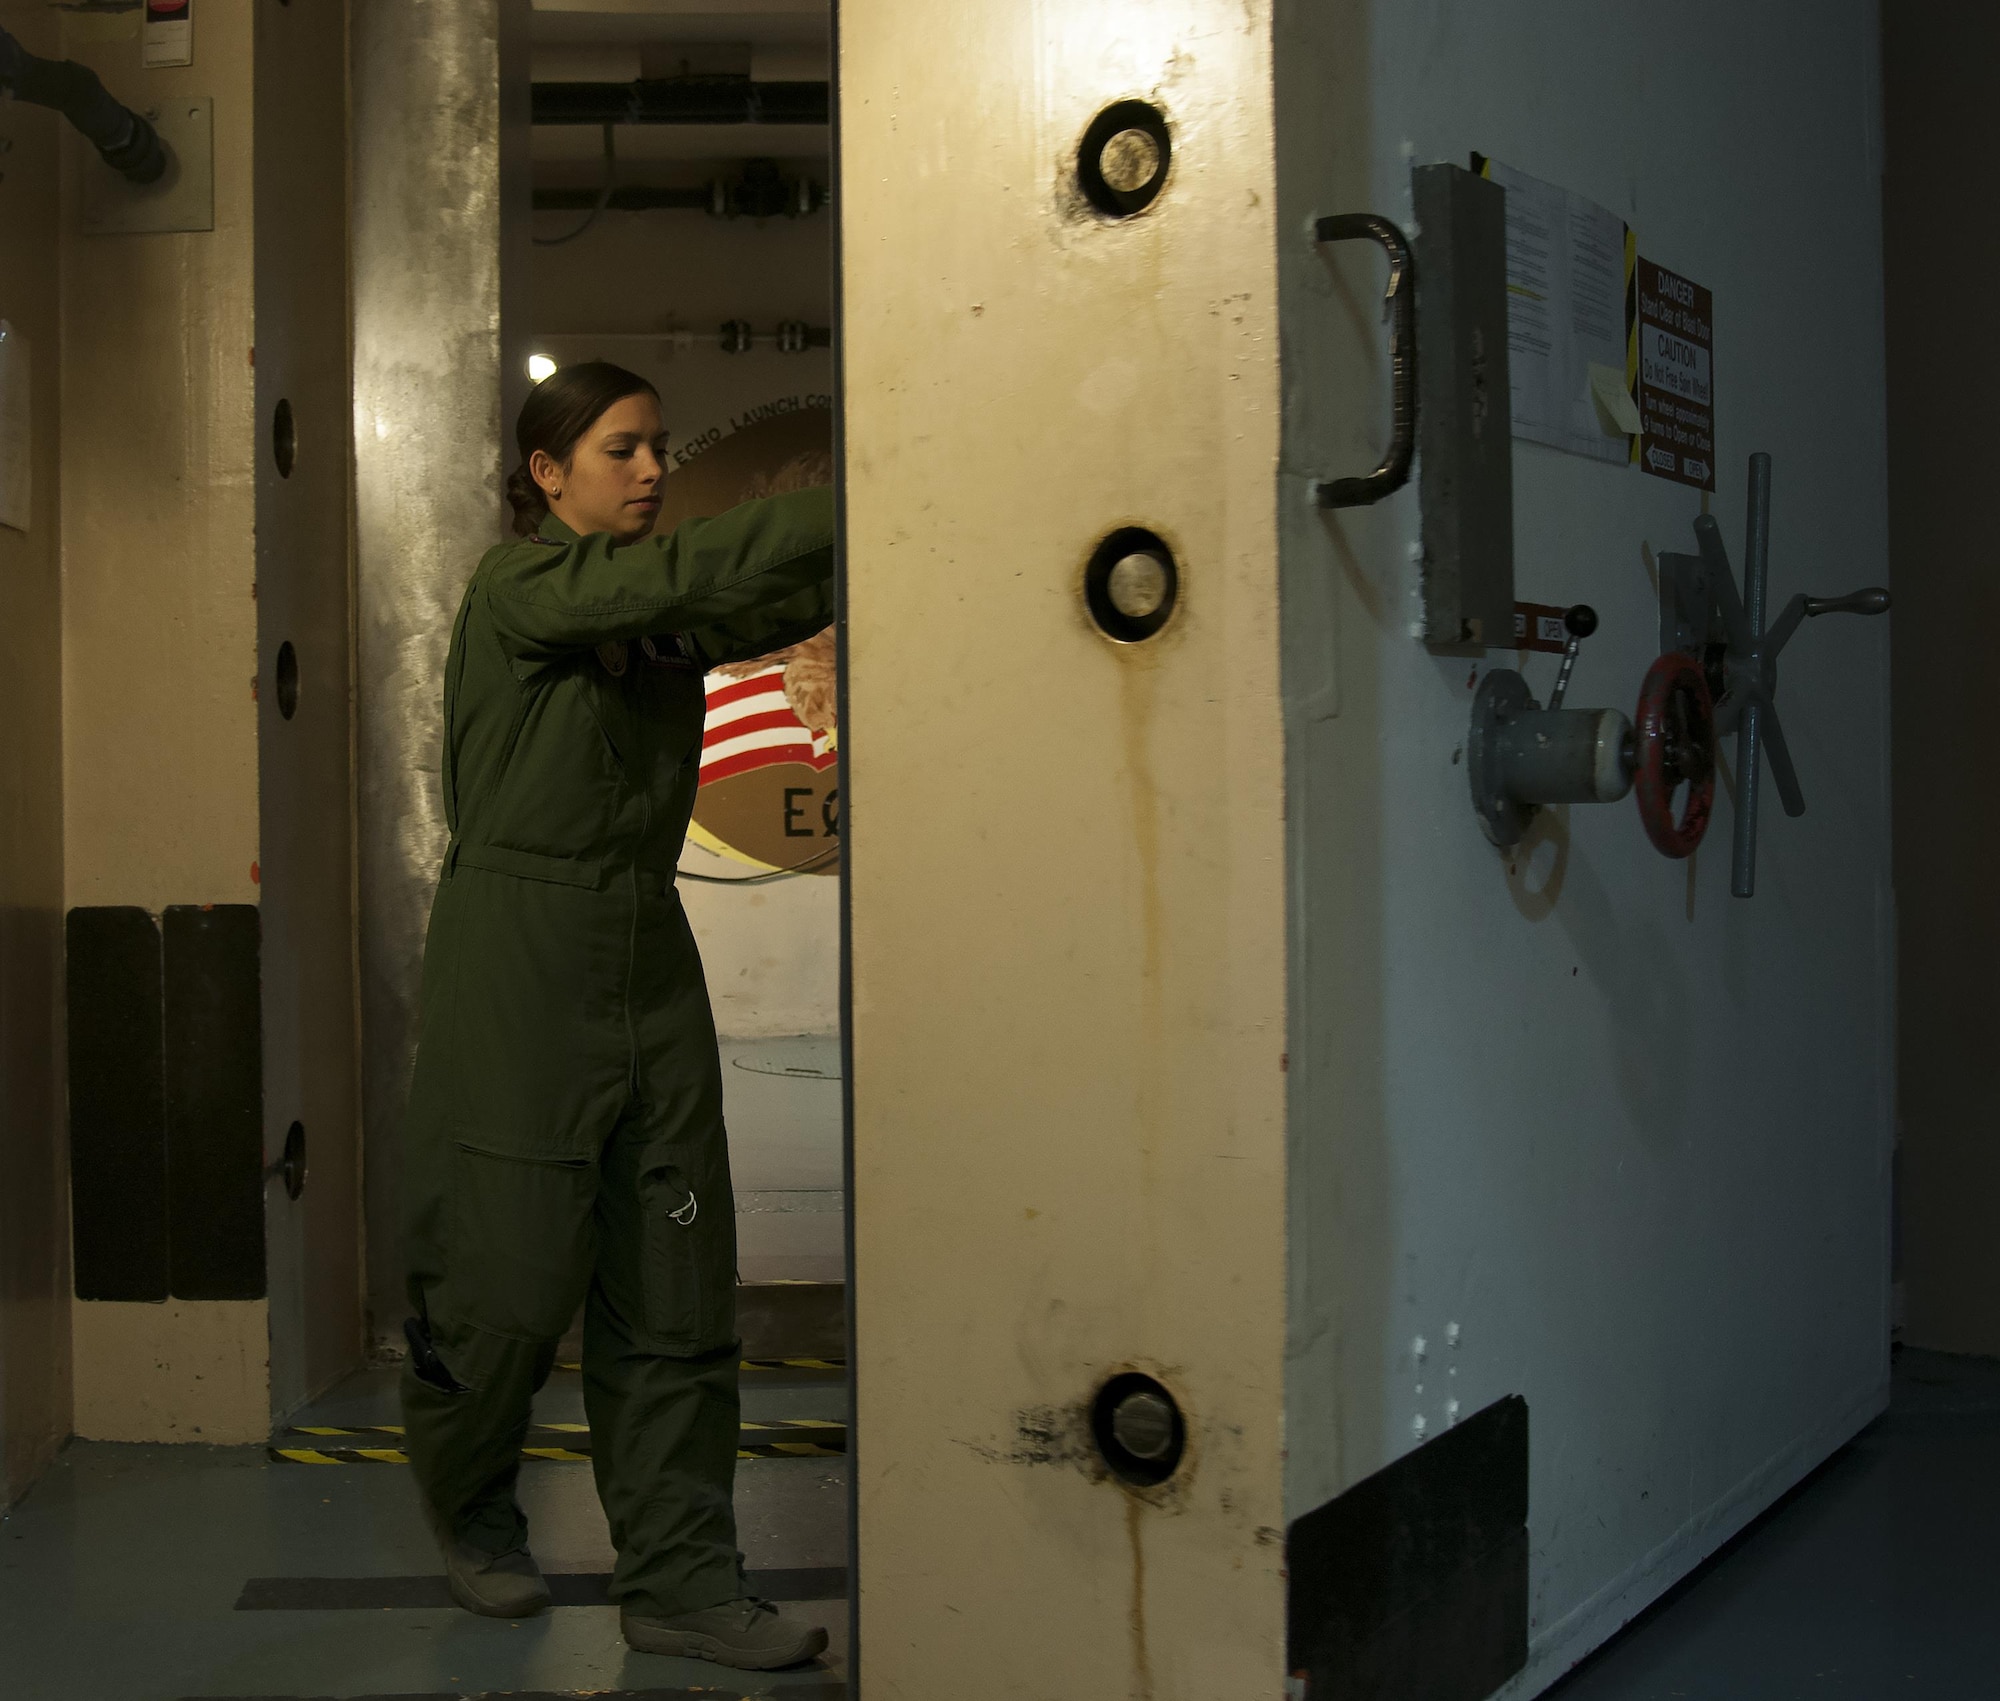 First Lt. Pamela Blanco-Coca, 319th Missile Squadron missile combat crew commander, closes the blast door underground at a Missile Alert Facility in the F.E. Warren Air Force Base, Wyo., missile complex Feb. 9, 2016. Heavy blast doors add to the survivability of the capsules and crews, in turn improving the ICBM force's deterrence capability. (U.S. Air Force photo by Senior Airman Jason Wiese)